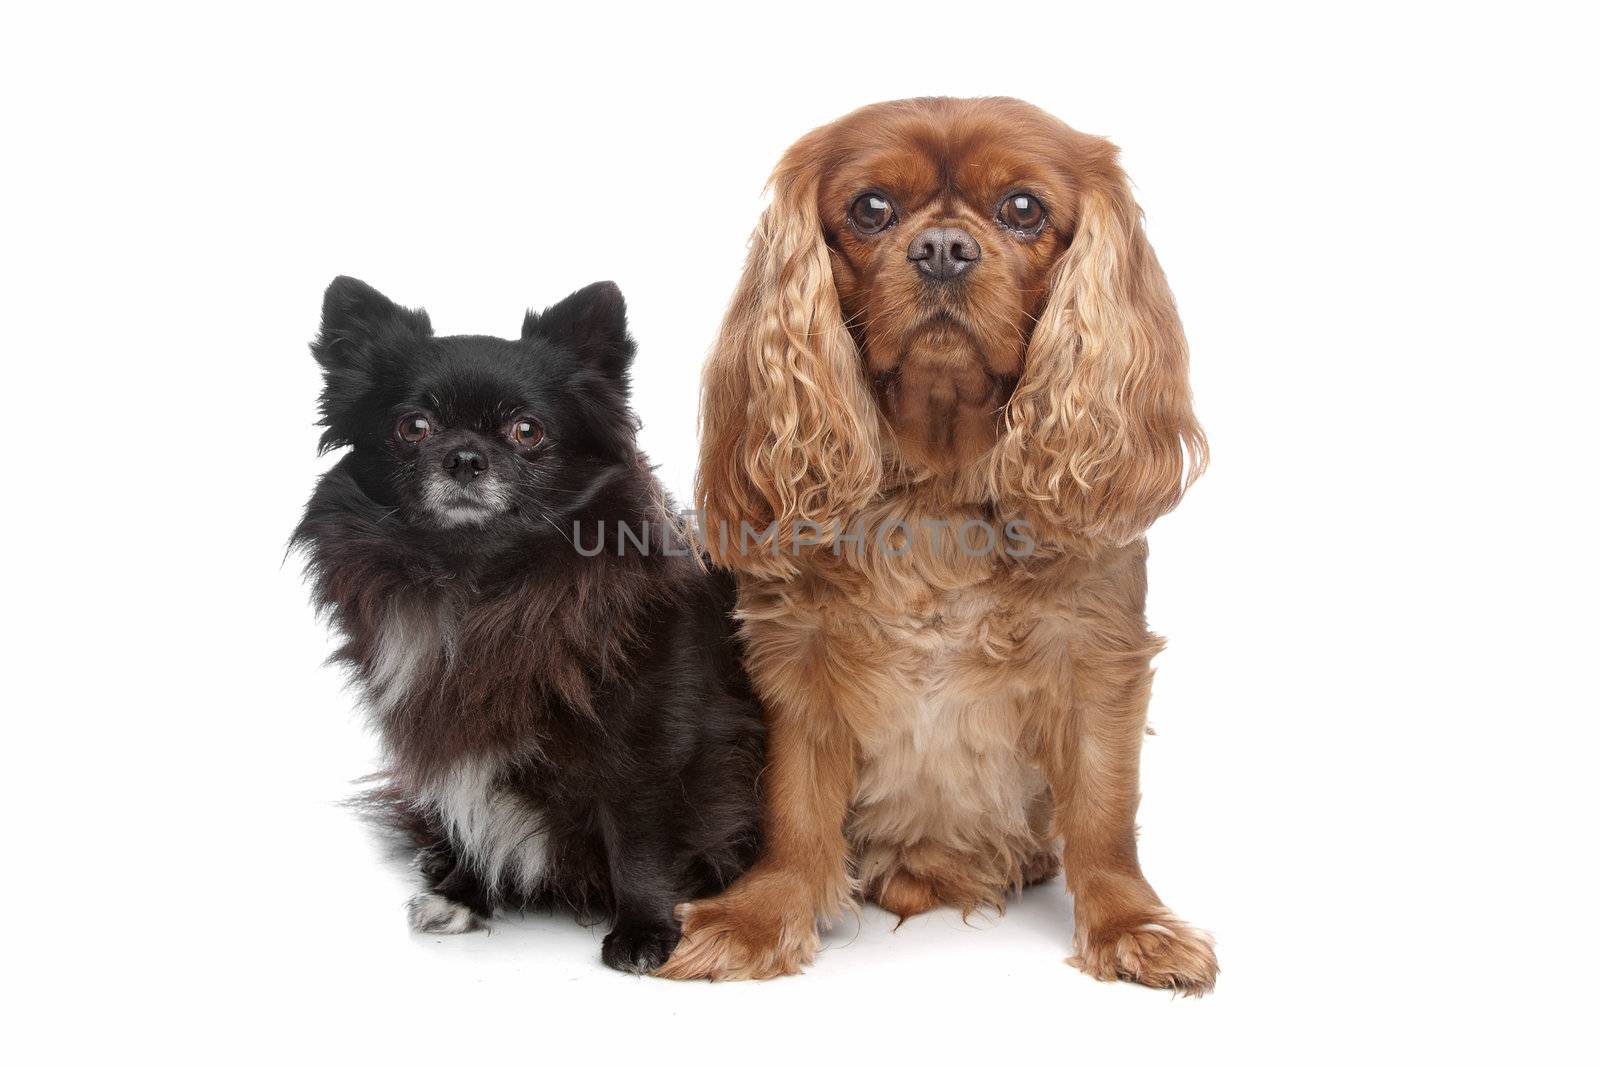 Cavalier King Charles Spaniel and a black chihuahua in front of a white background